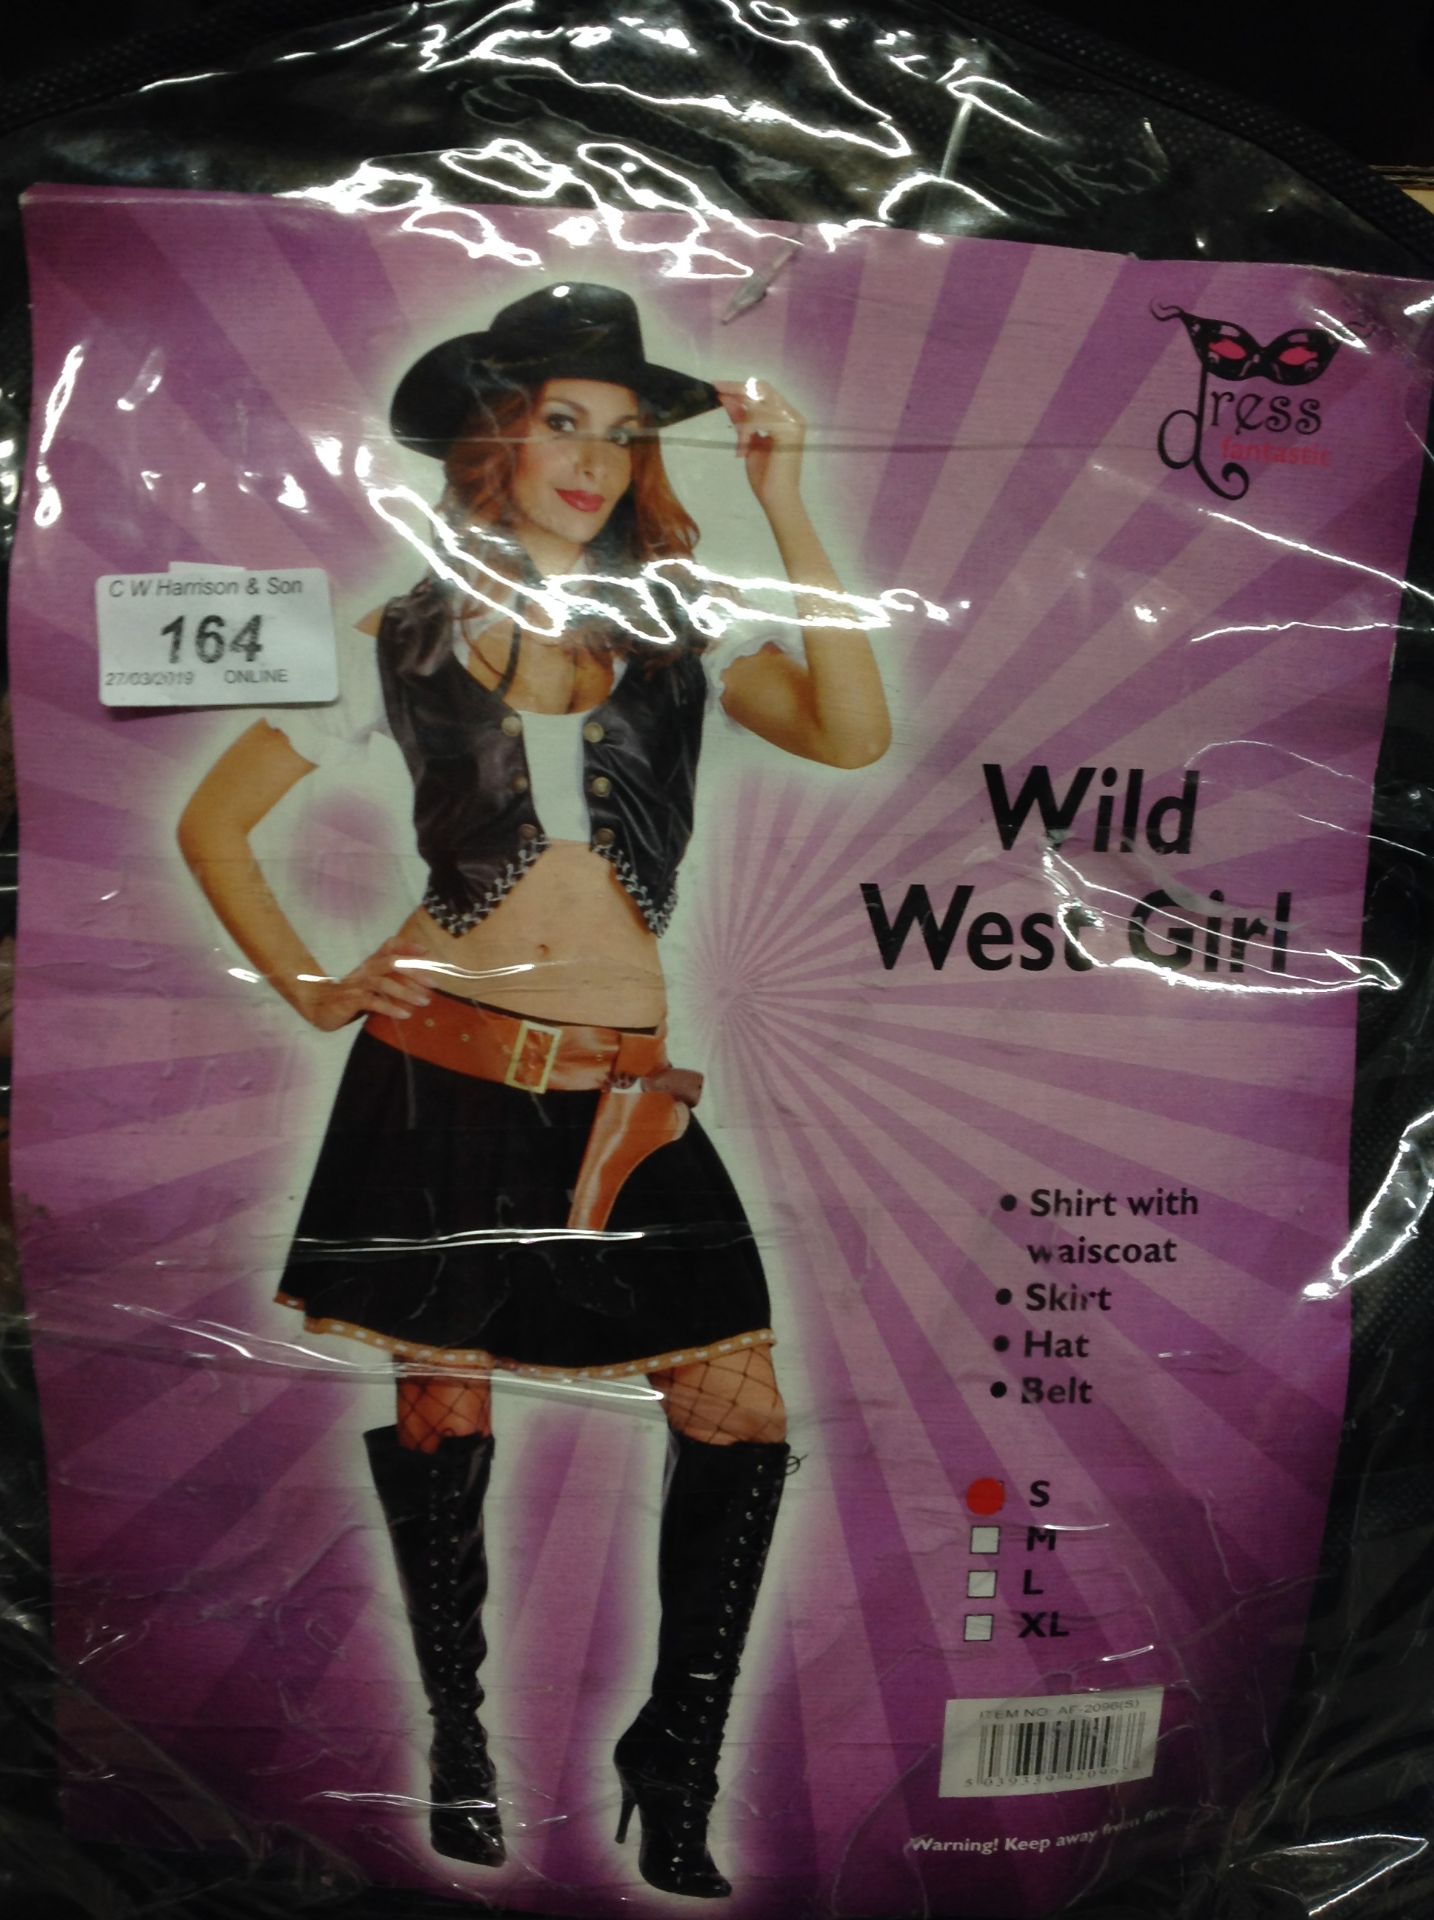 13 x dress fantastic adult wild west girl costumes sizes S/M - please note blue crates are not